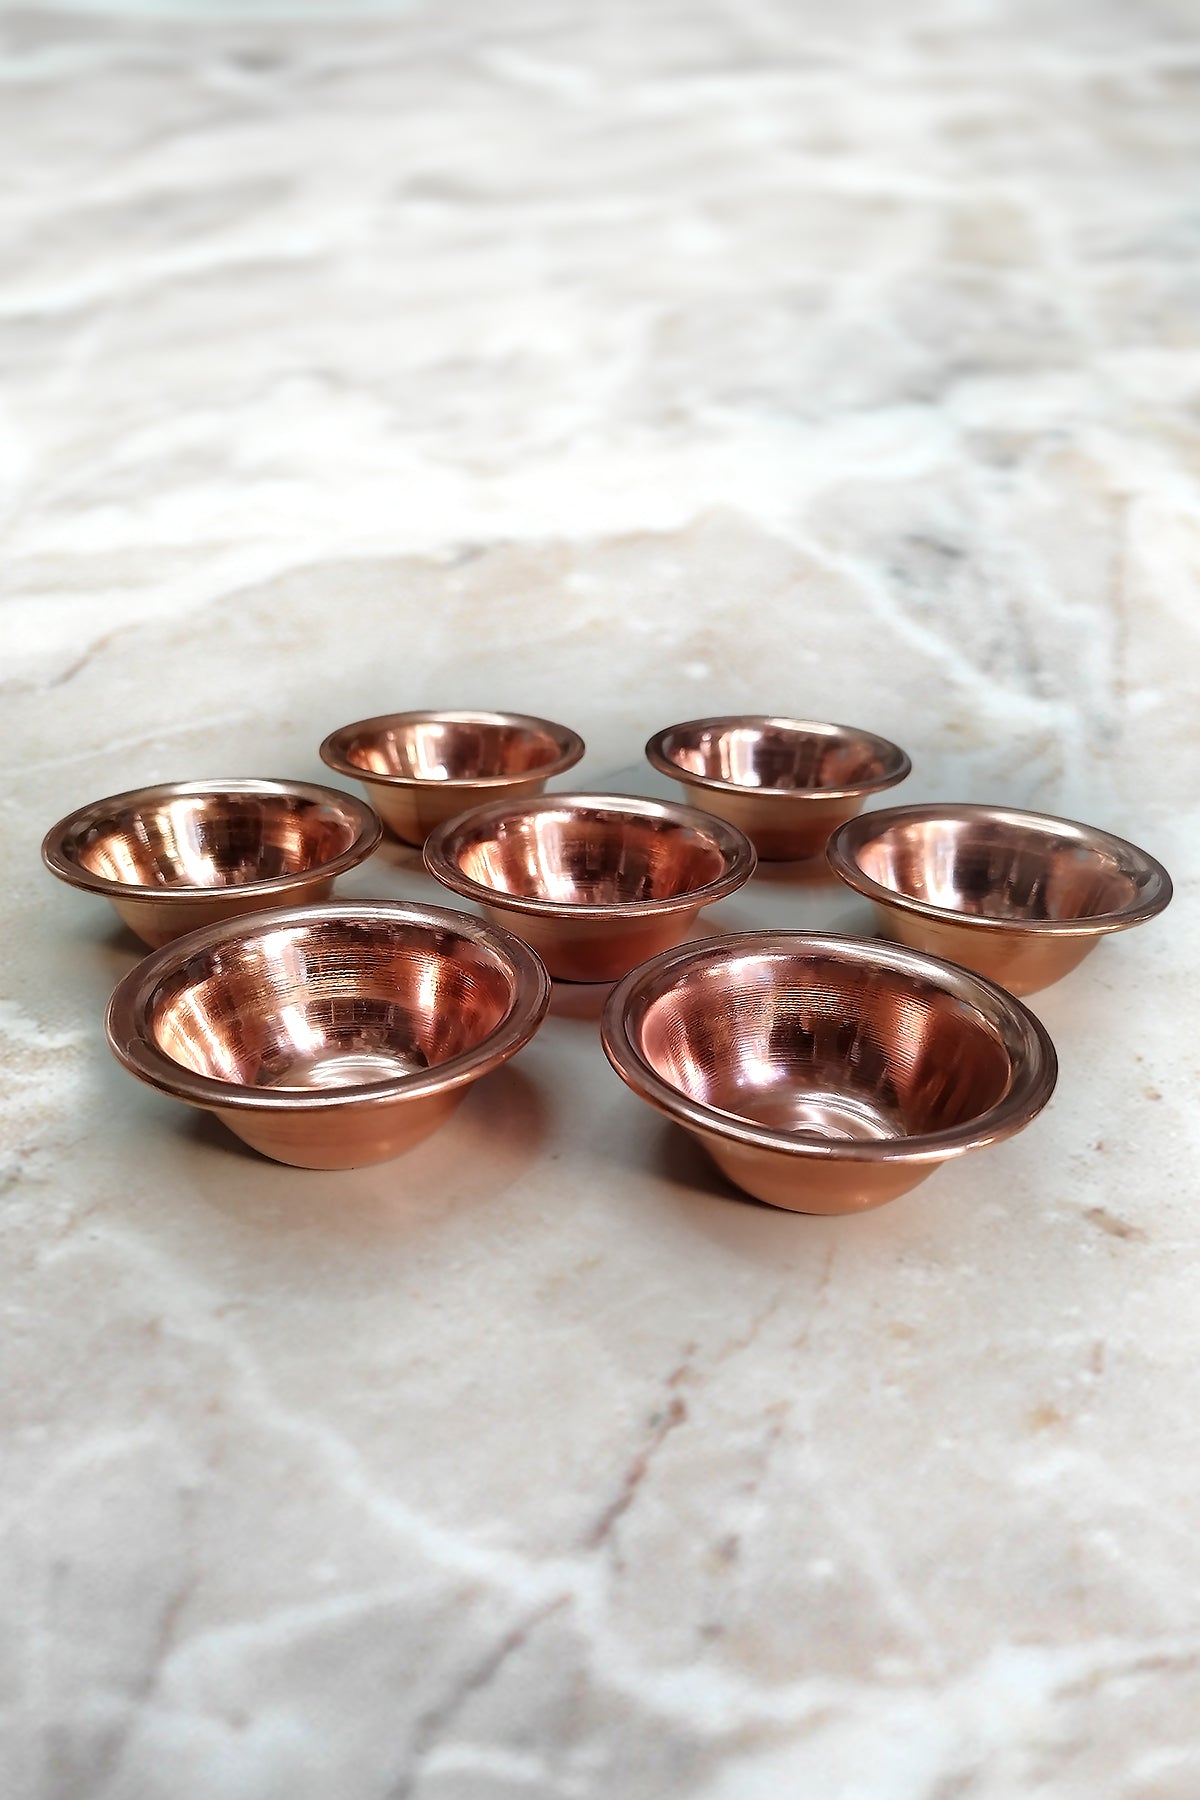 Handmade Buddhist Copper Offering Bowls: Perfect for Rituals